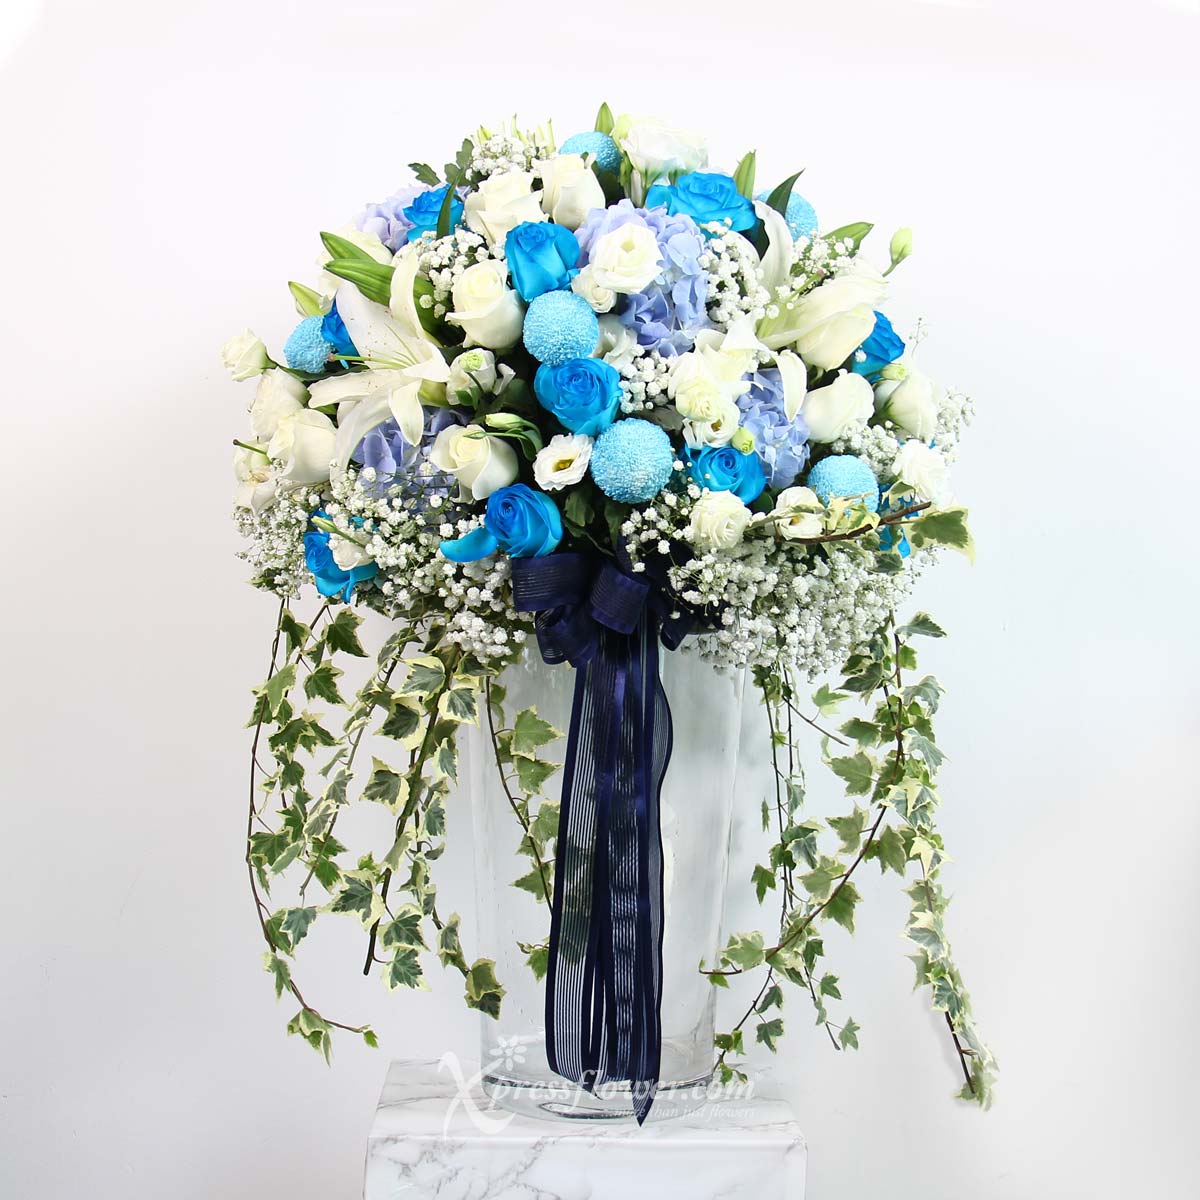 Grand Ultramarine (20 Blue Roses & 20 White Roses with Blue Hydrageas & Lily Sprays)